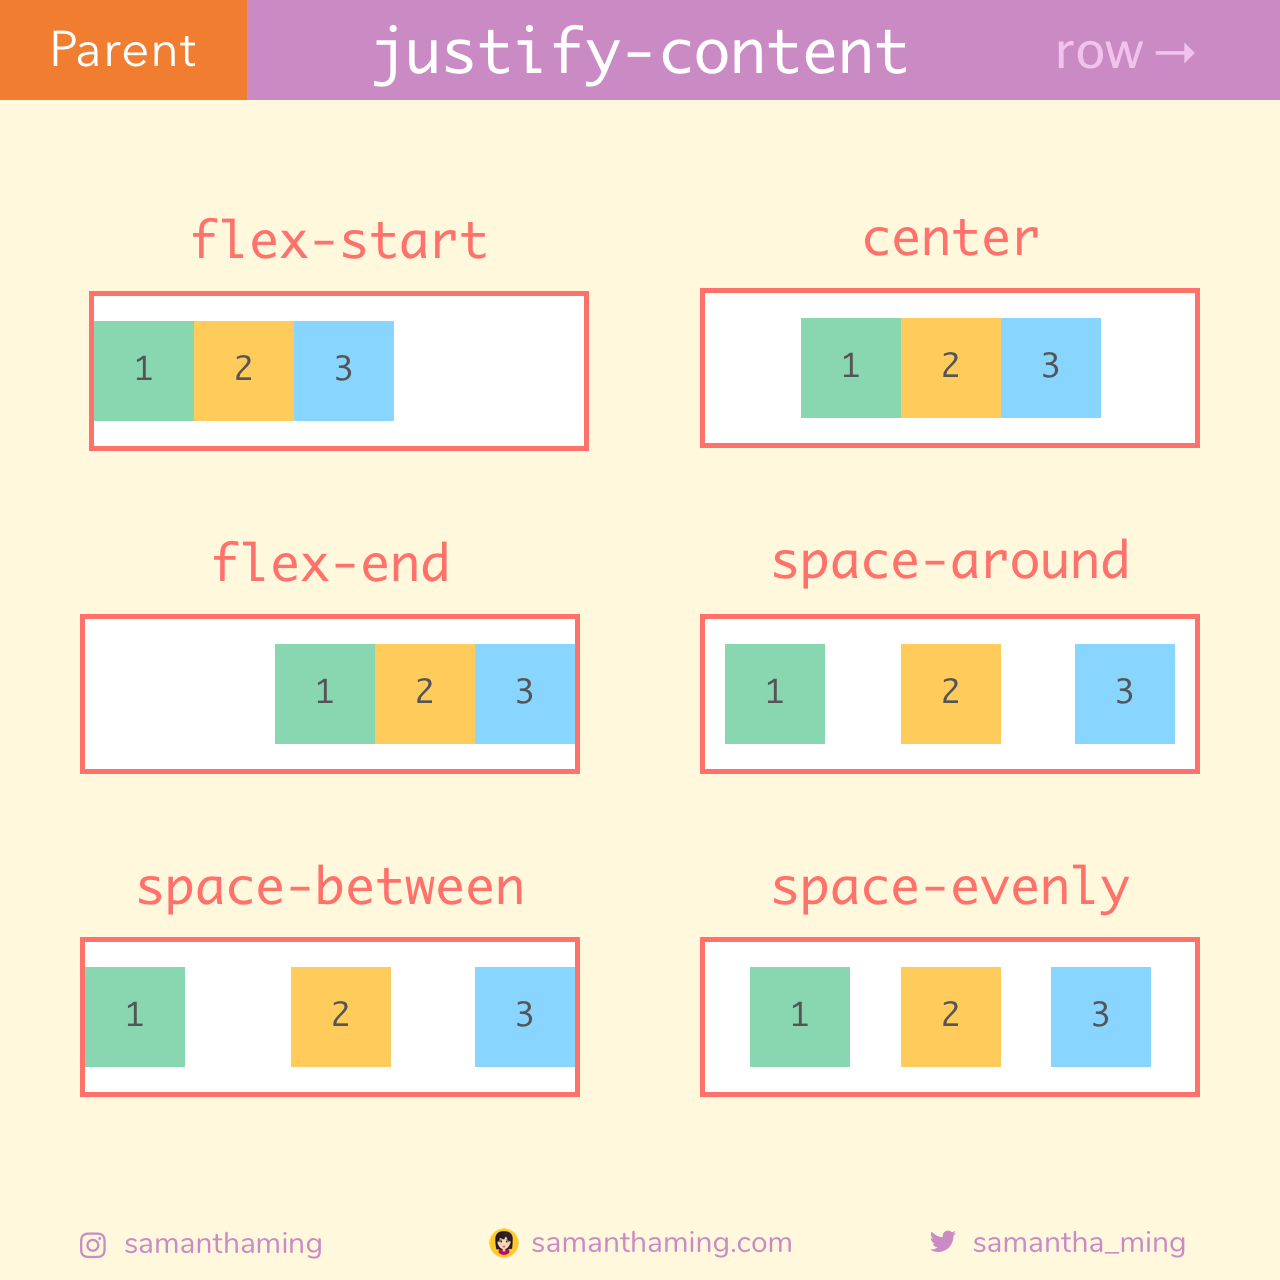 Justify content space between. Justify-content. Flex justify-content. Justify-content: Flex-start;.